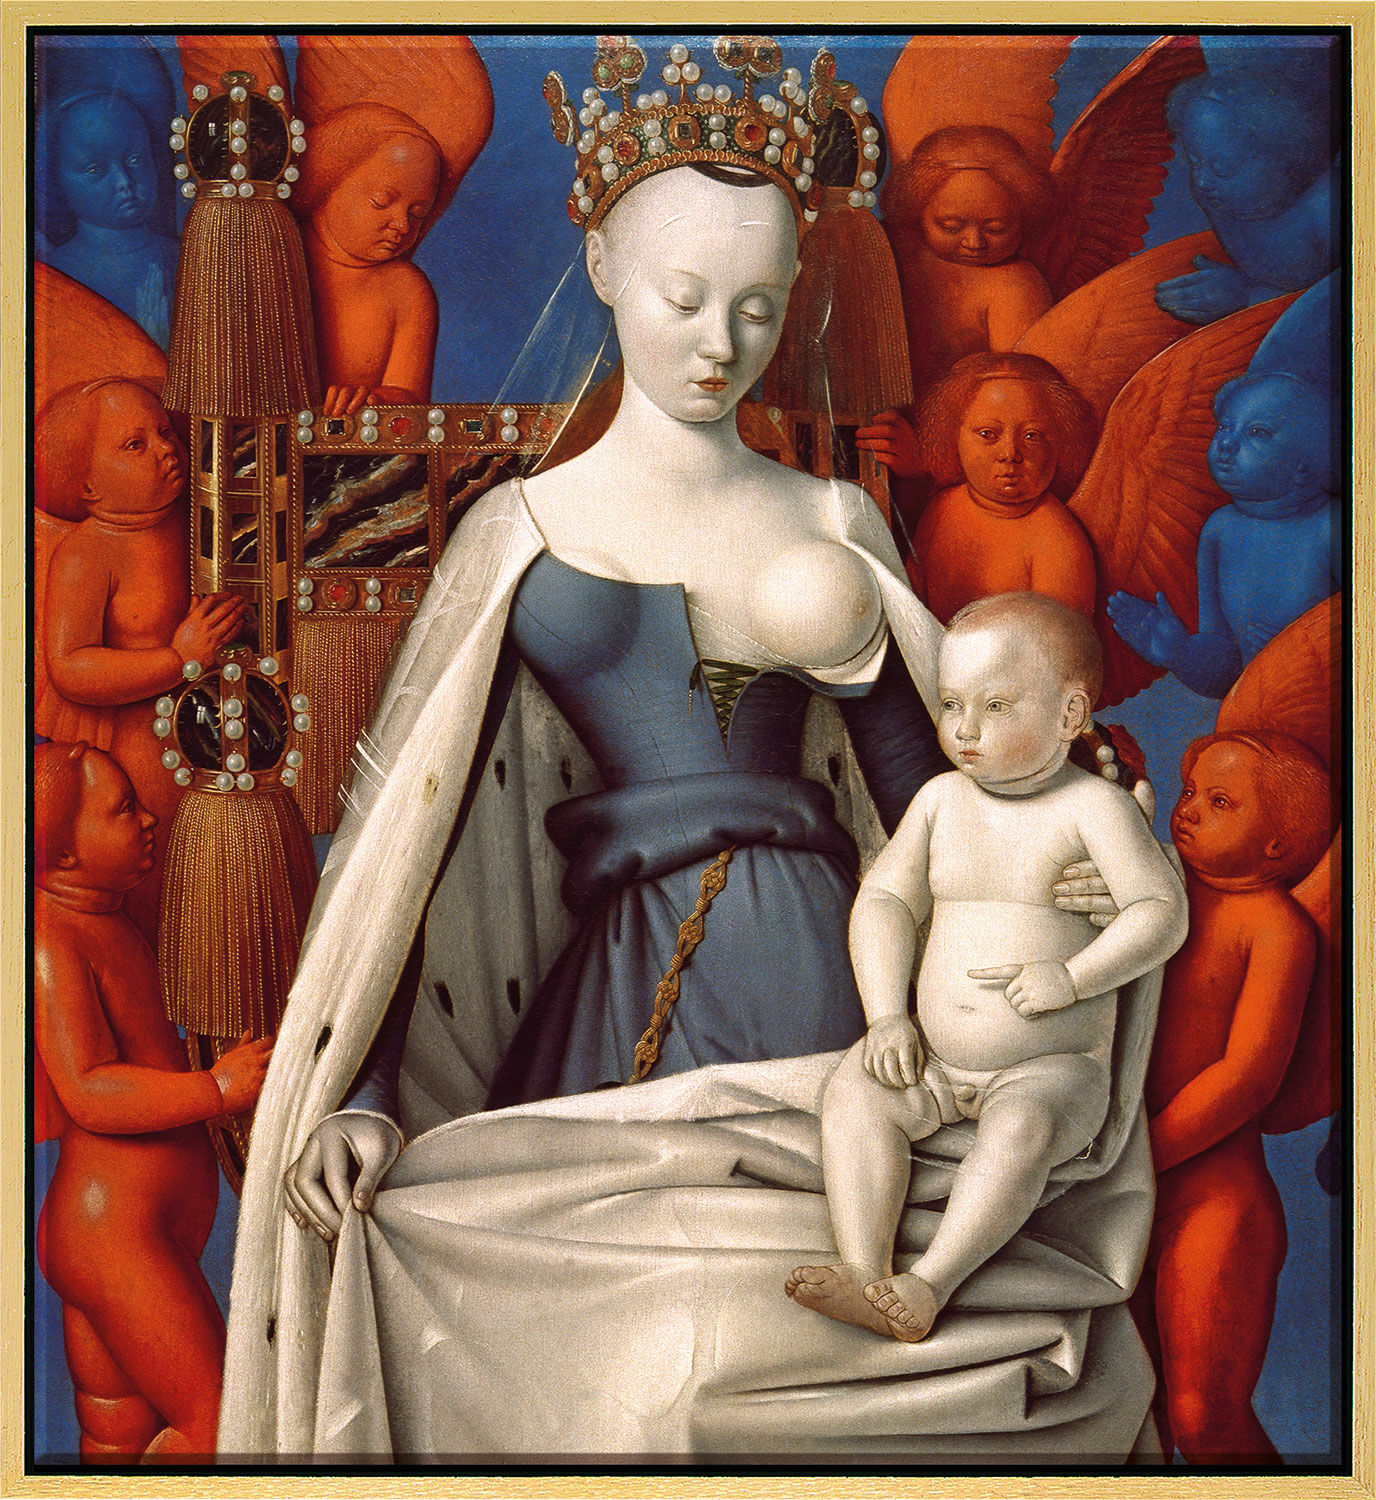 Picture "Madonna Surrounded by Cherubim and Seraphim" (around 1450), golden framed version by Jean Fouquet